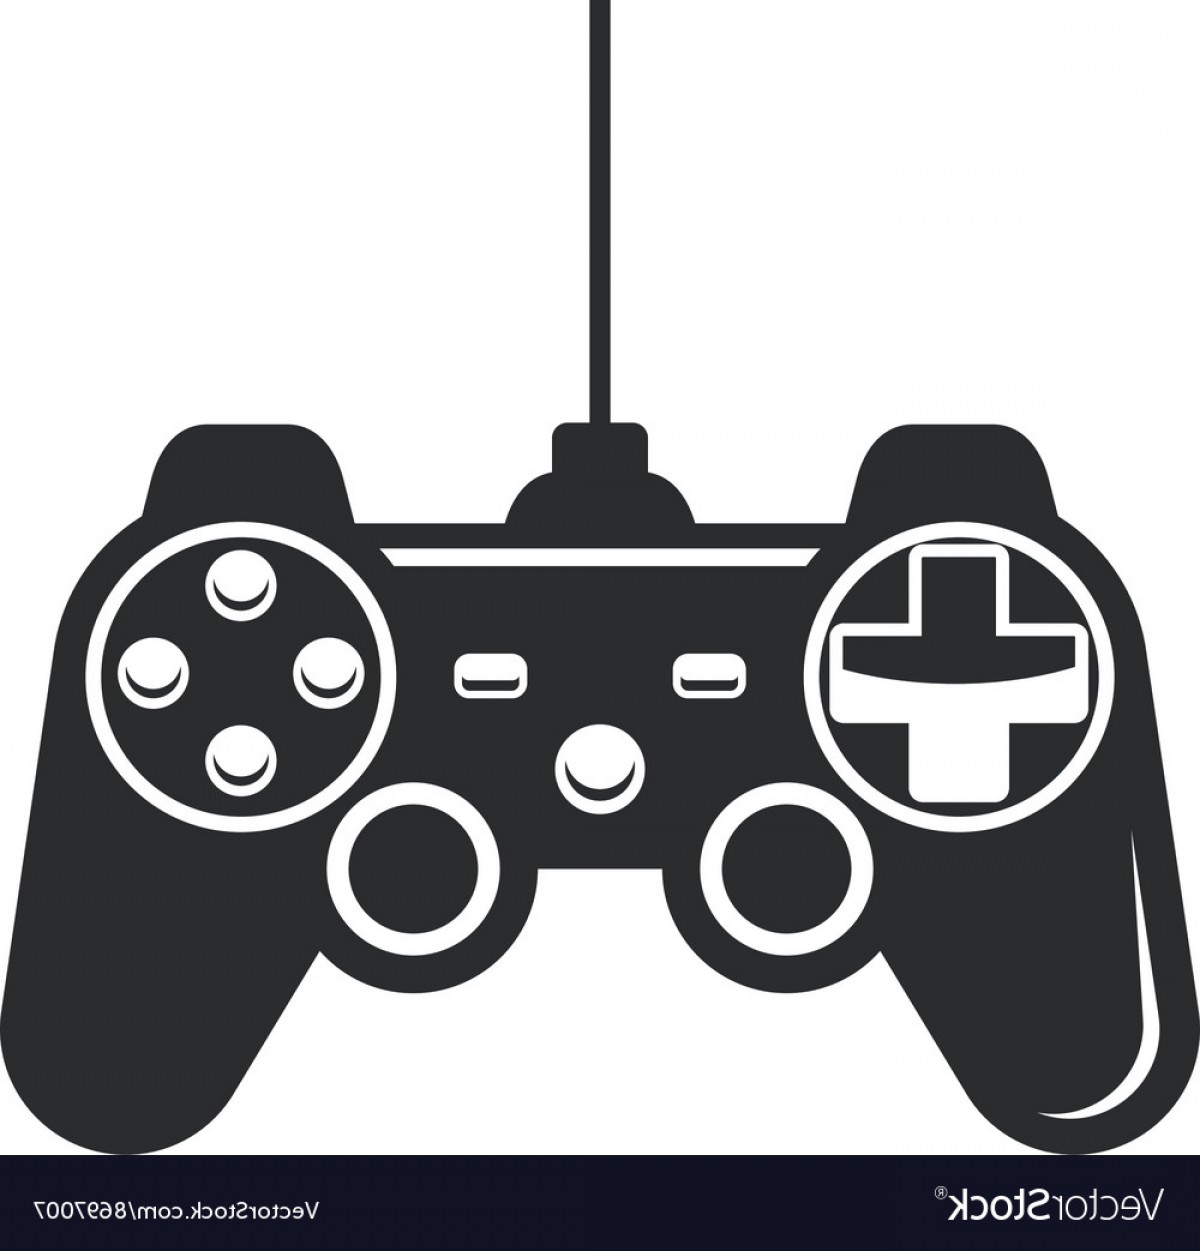 Vector Game Console at Vectorified.com | Collection of Vector Game ...